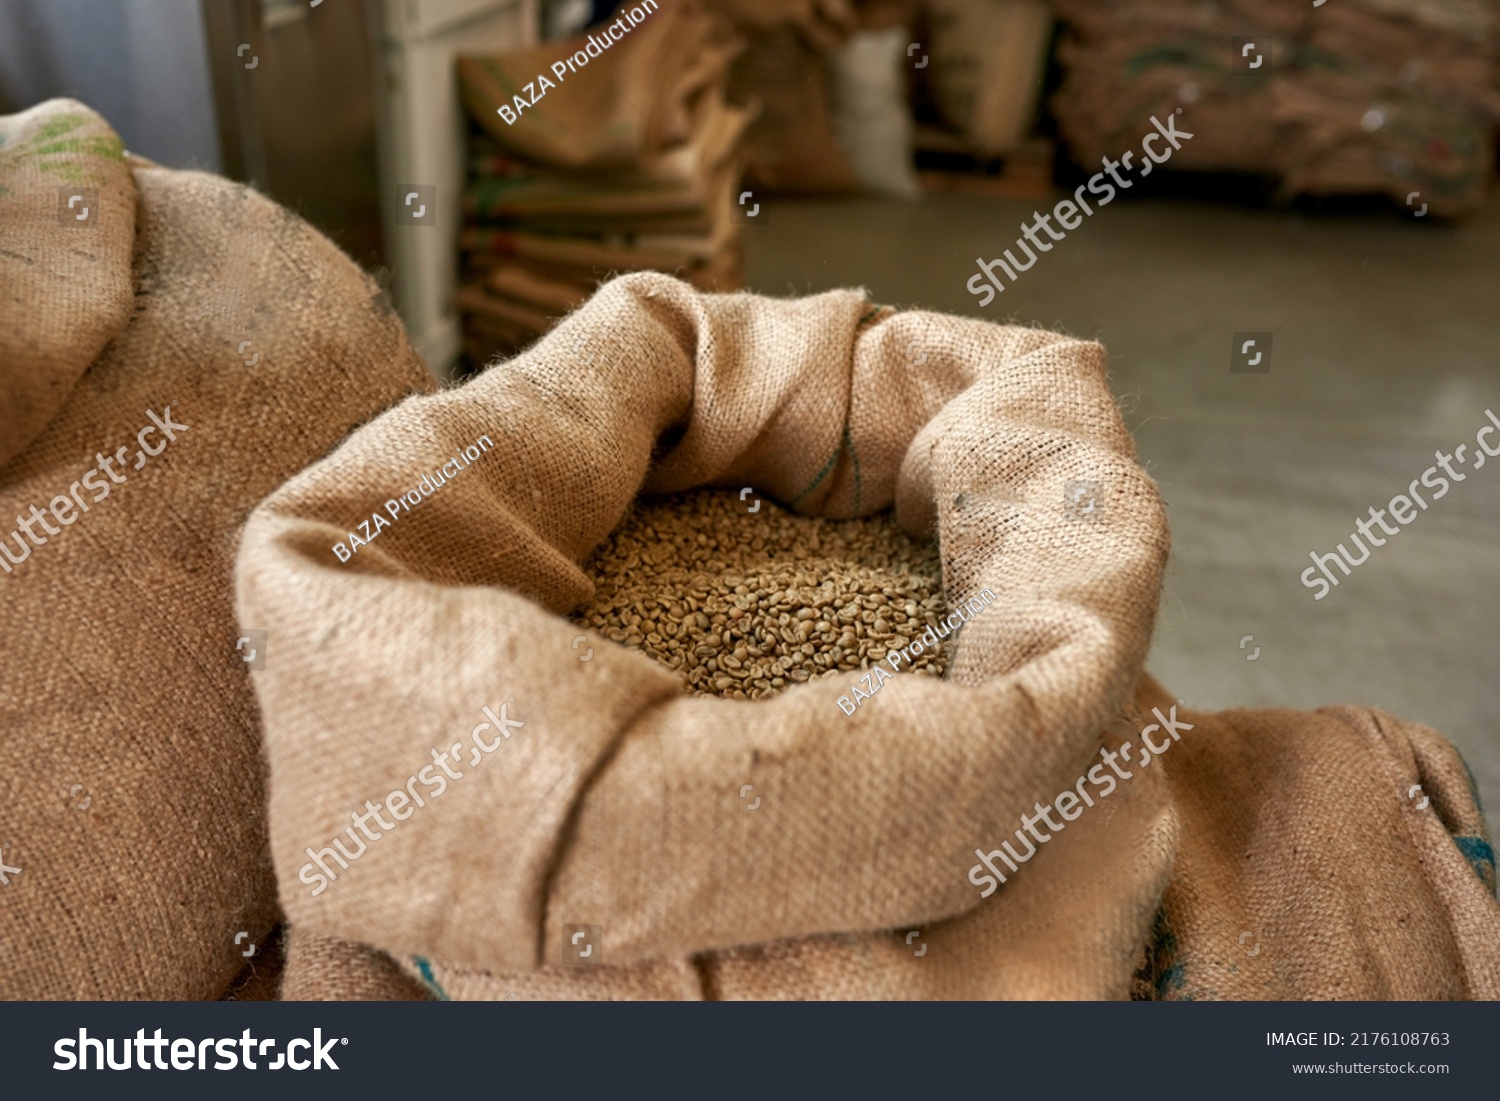 Textile sack full of fresh organic natural aromatic green coffee beans on factory or warehouse. High quality agriculture grains for coffee making and production. Coffee seeds for export. Nobody #2176108763